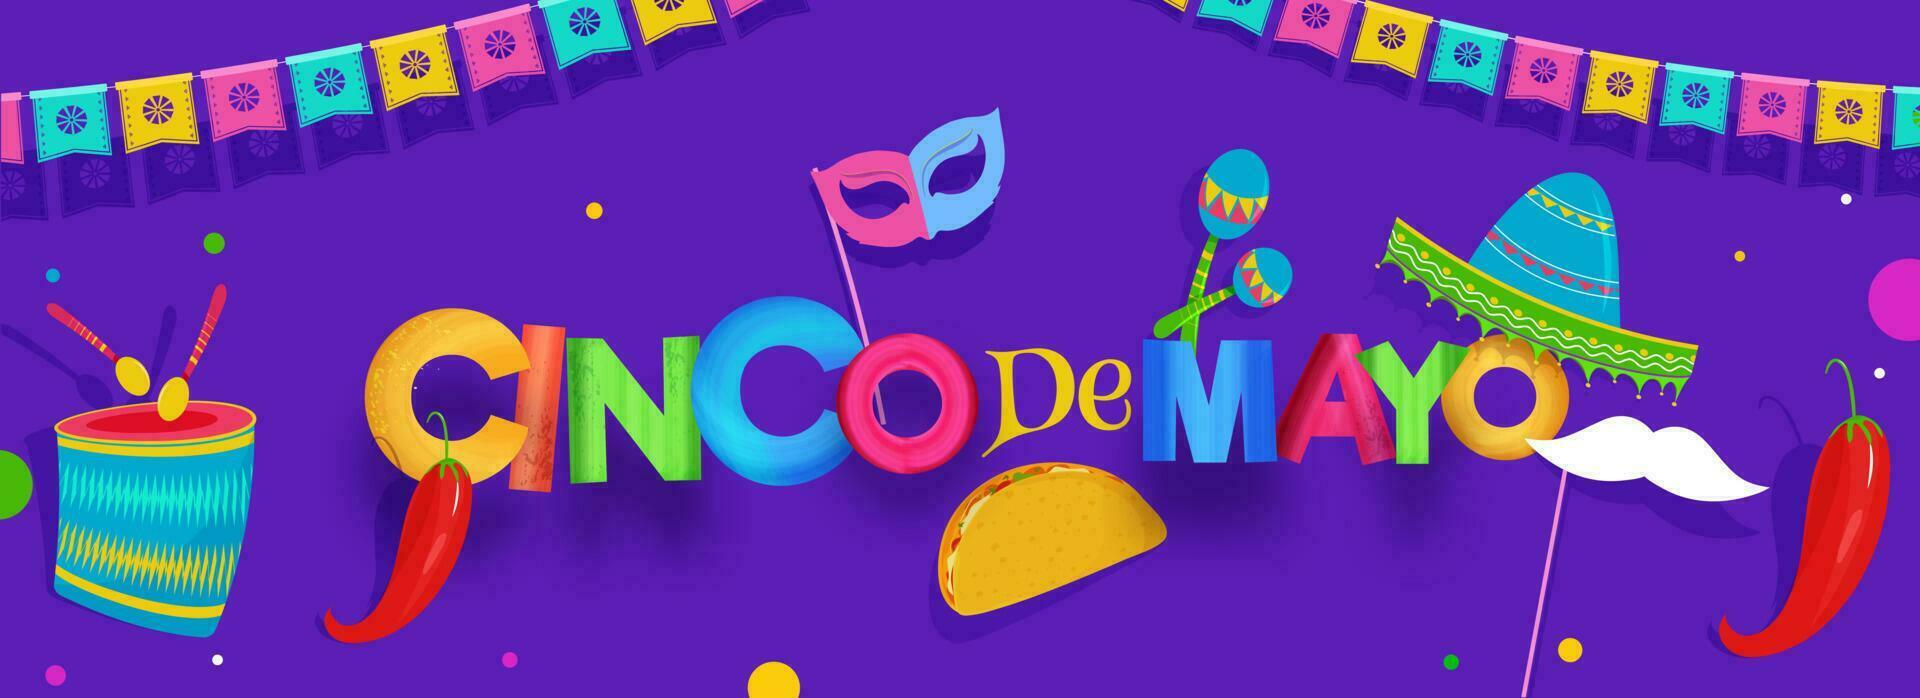 Purple header or banner design decorated with colorful bunting and party elements for Cinco De Mayo celebration. vector